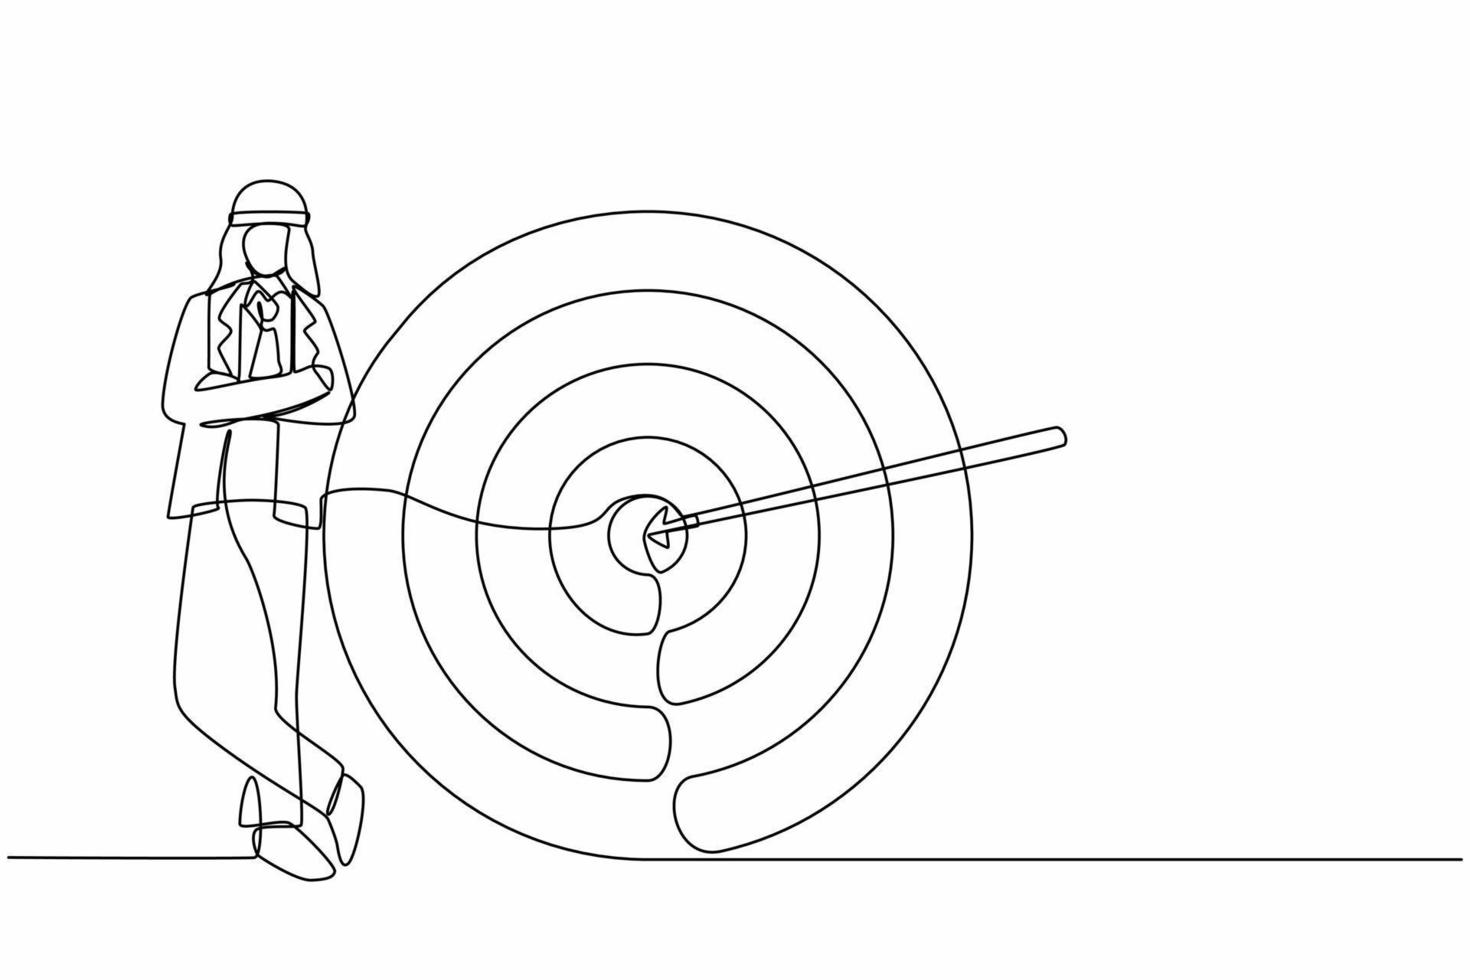 Single one line drawing Arabian businessman or manager is standing near target. Arrow hit target exactly. Making goals, successful business strategy. Modern continuous line draw design graphic vector